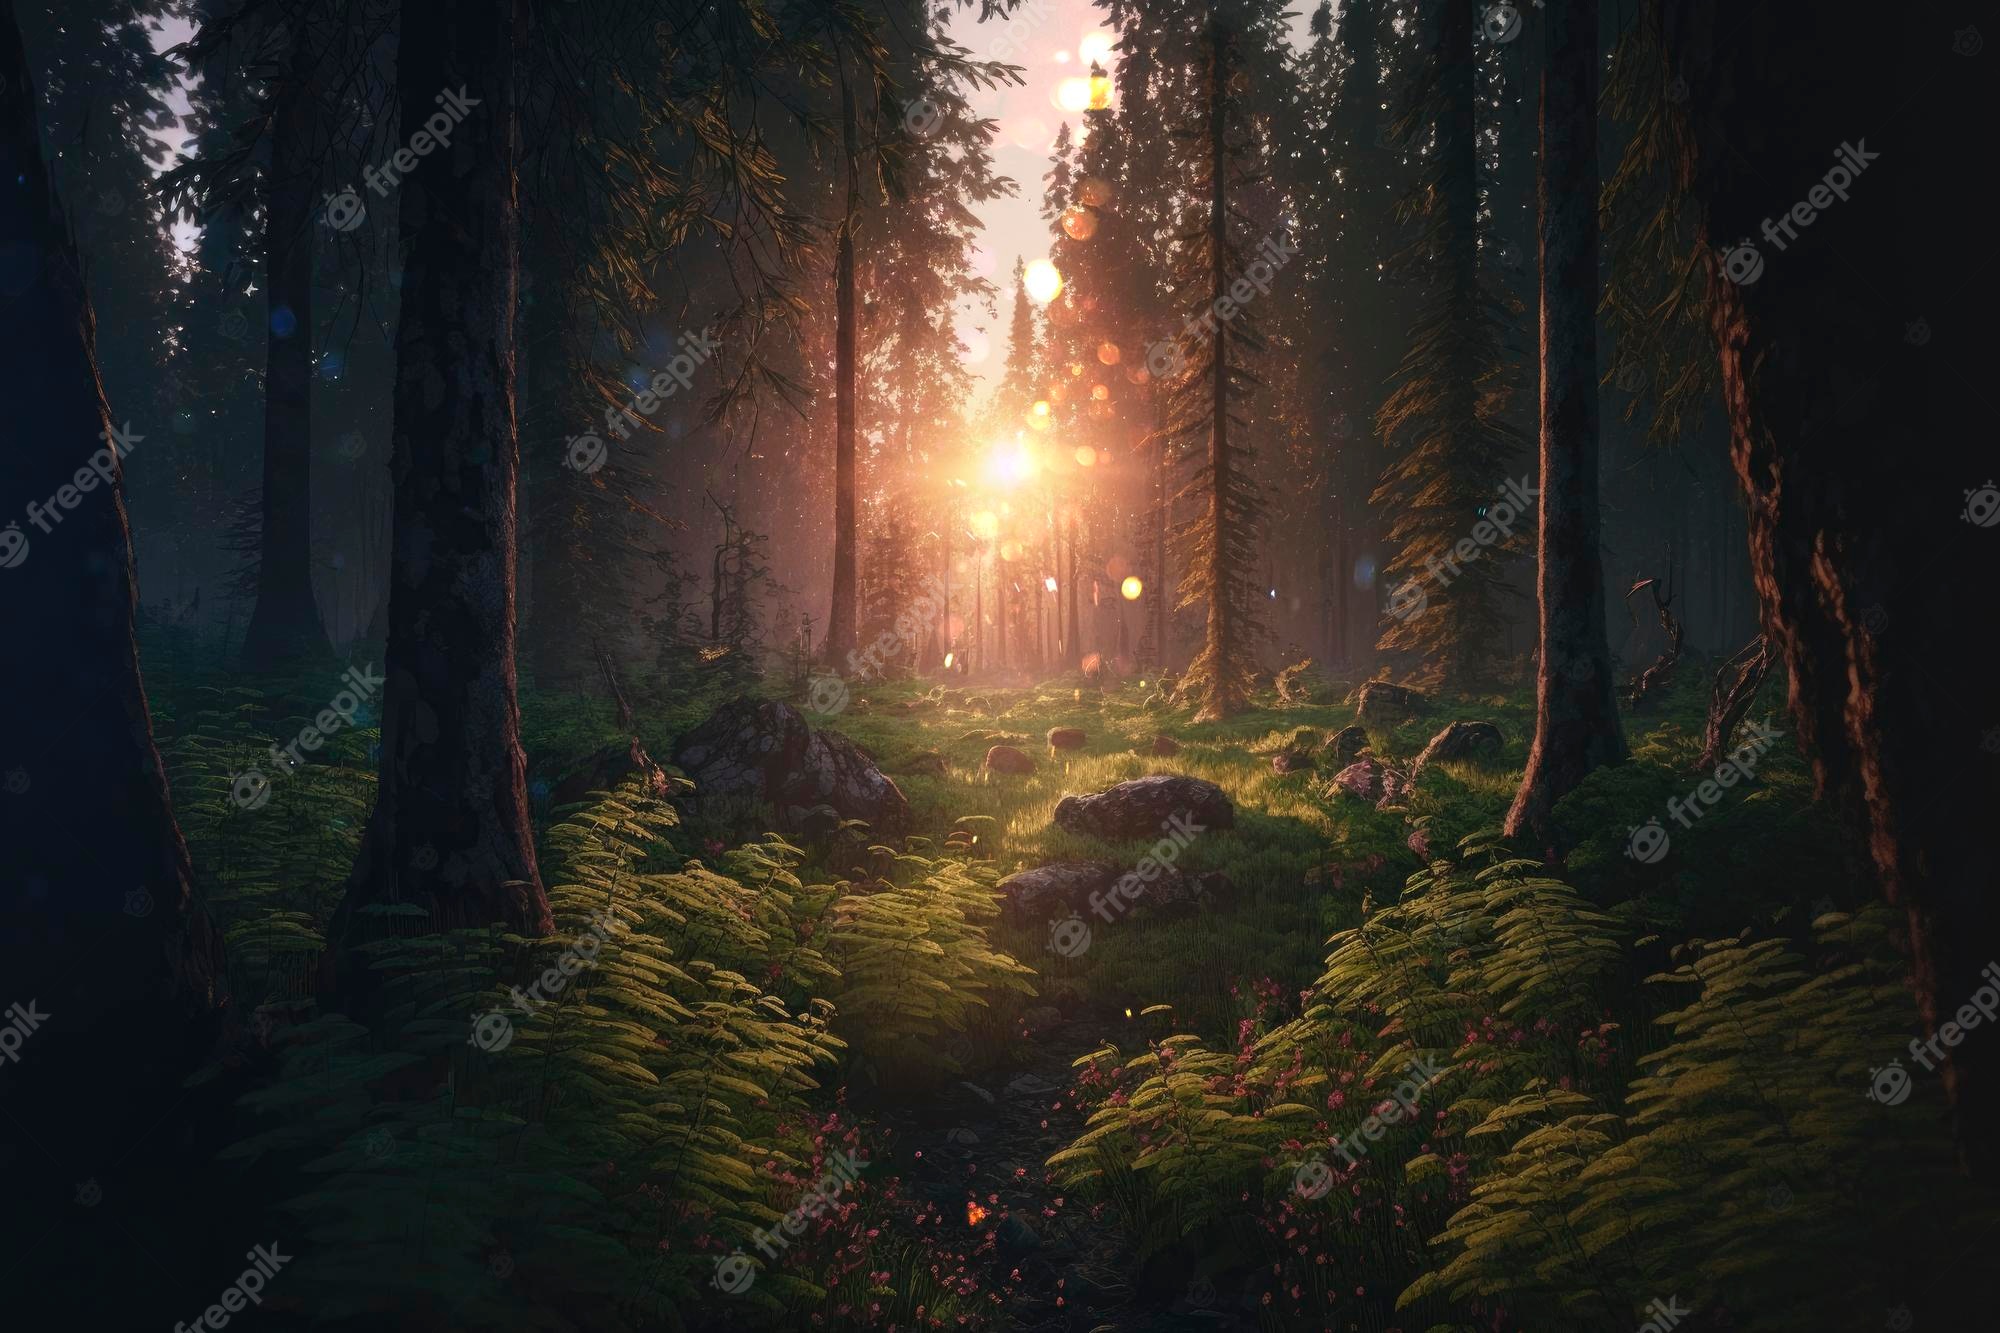 Digital painting of a forest with a path leading towards the light - Magic